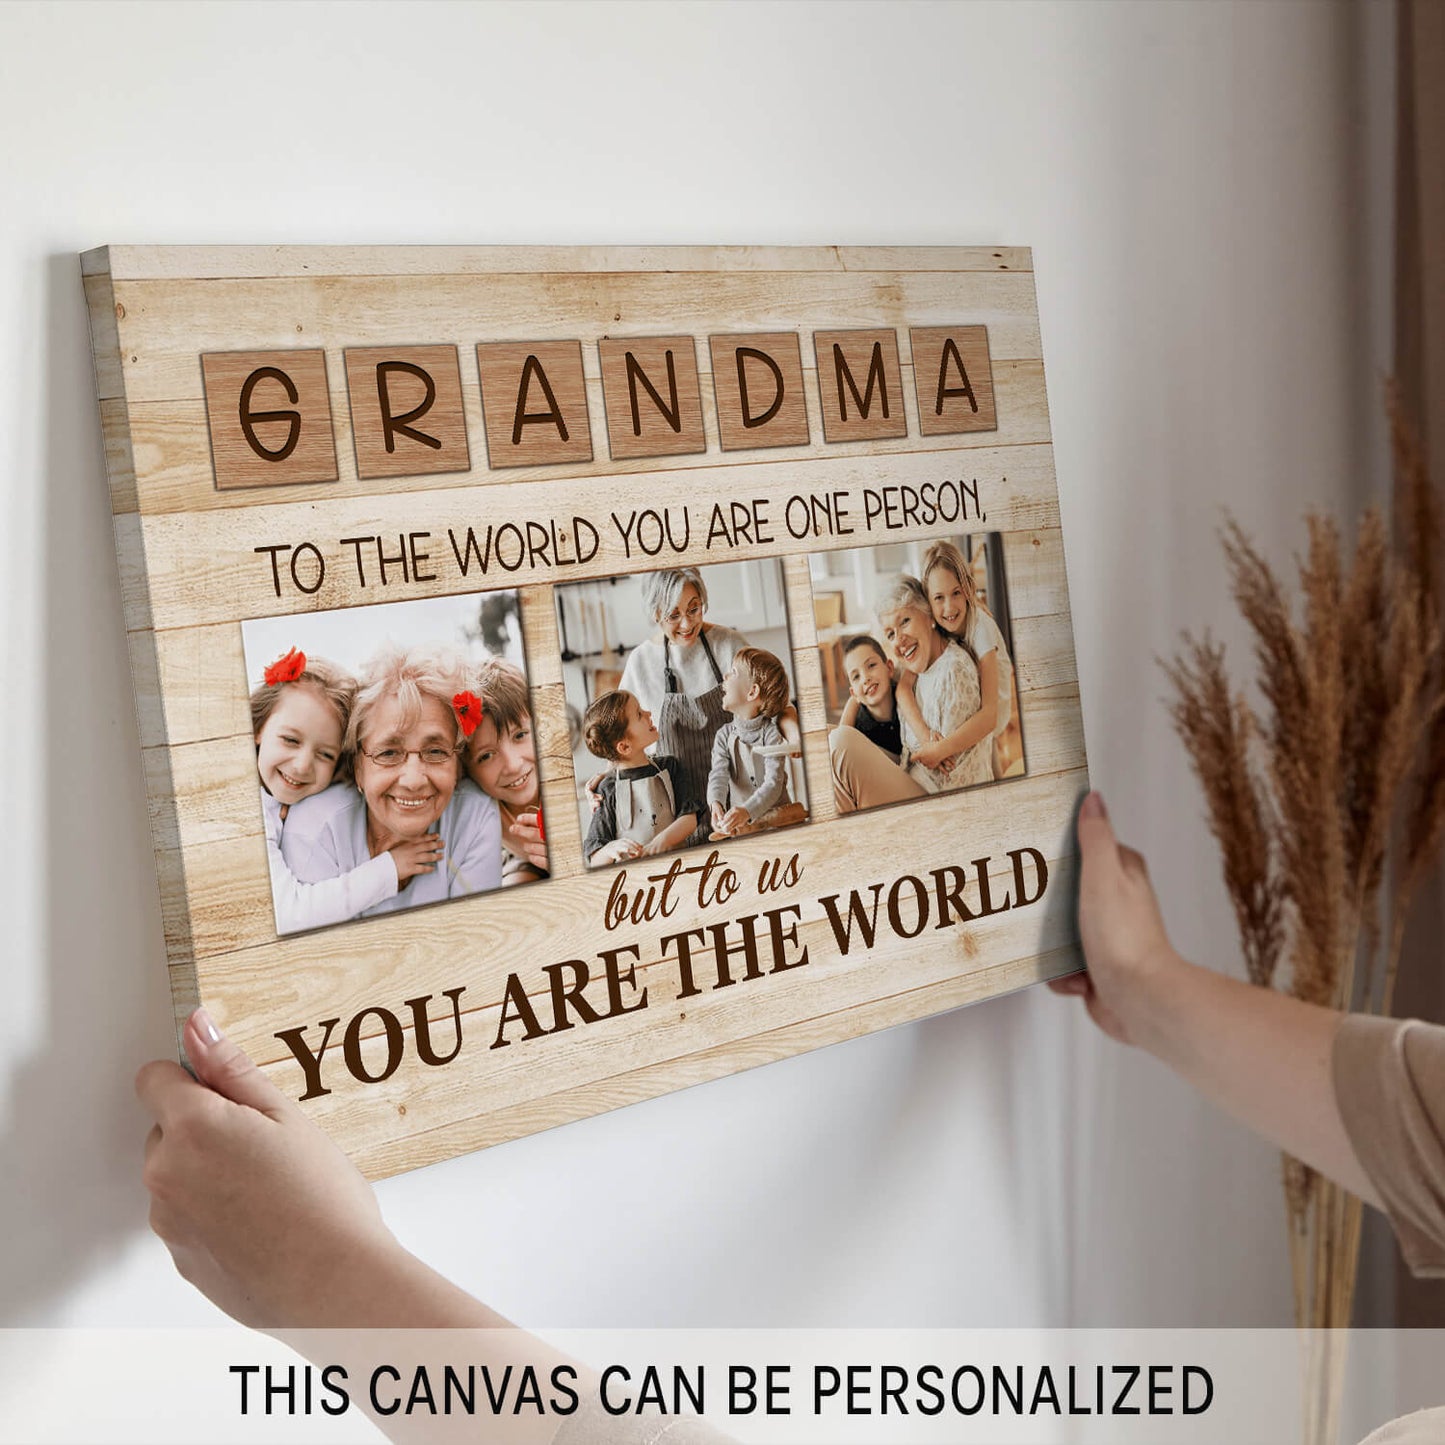 Grandma to the world - Personalized Mother's Day or Birthday gift for Grandma - Custom Canvas Print - MyMindfulGifts